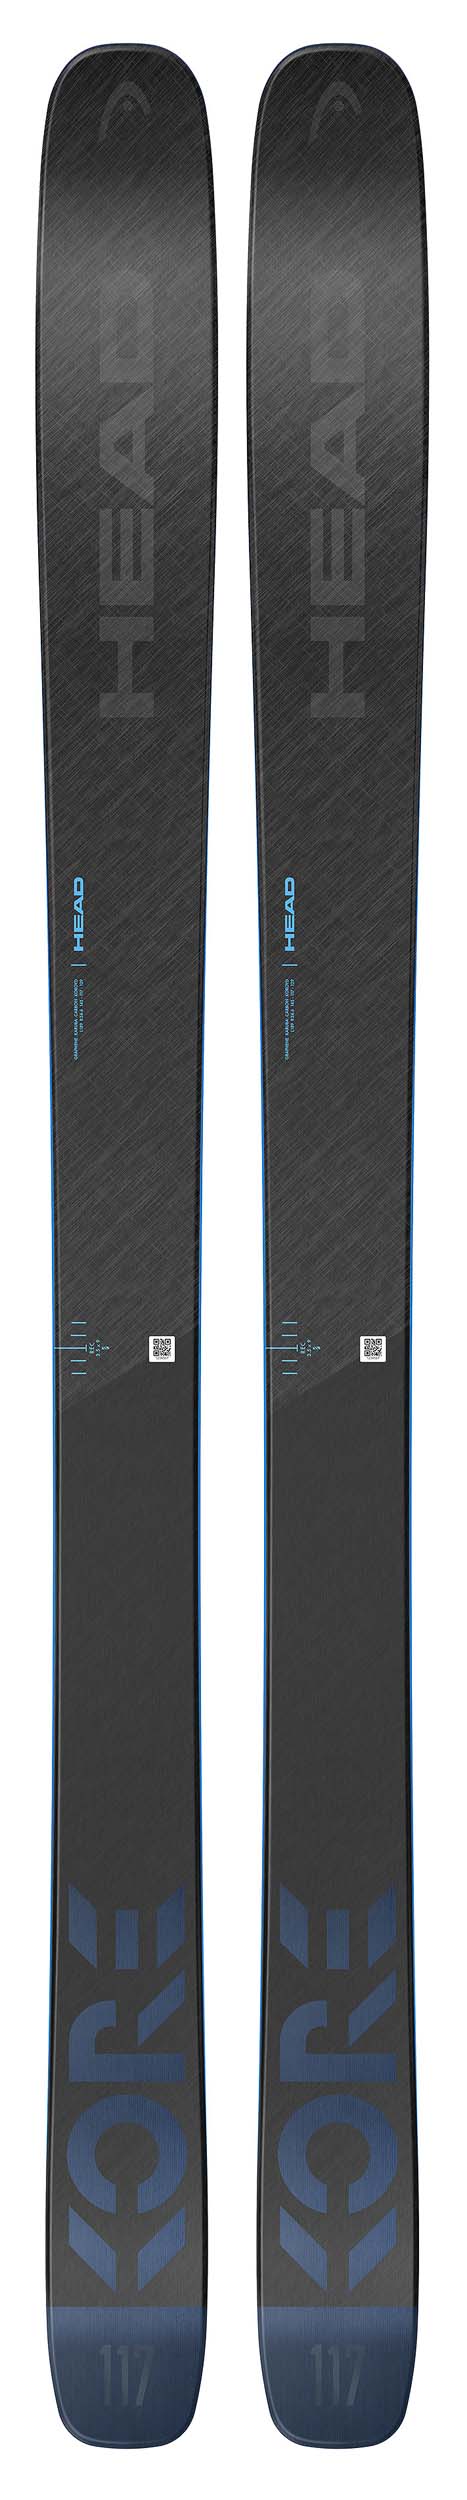 Head 2021 Kore 117 Skis (Without Bindings / Flat) NEW !! 180cm